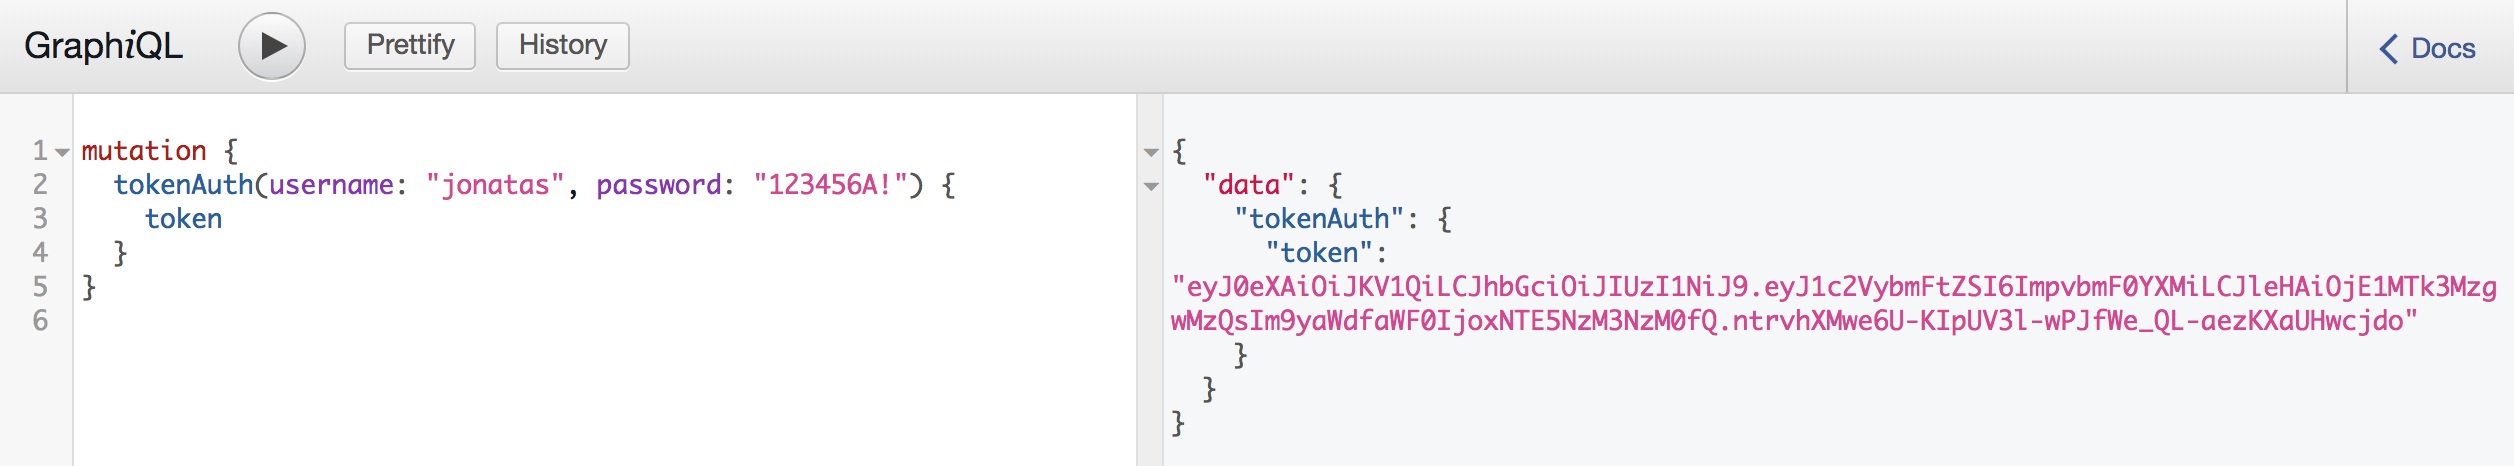 TokenAuth is used to authenticate the User with its username and password to obtain the JSON Web token